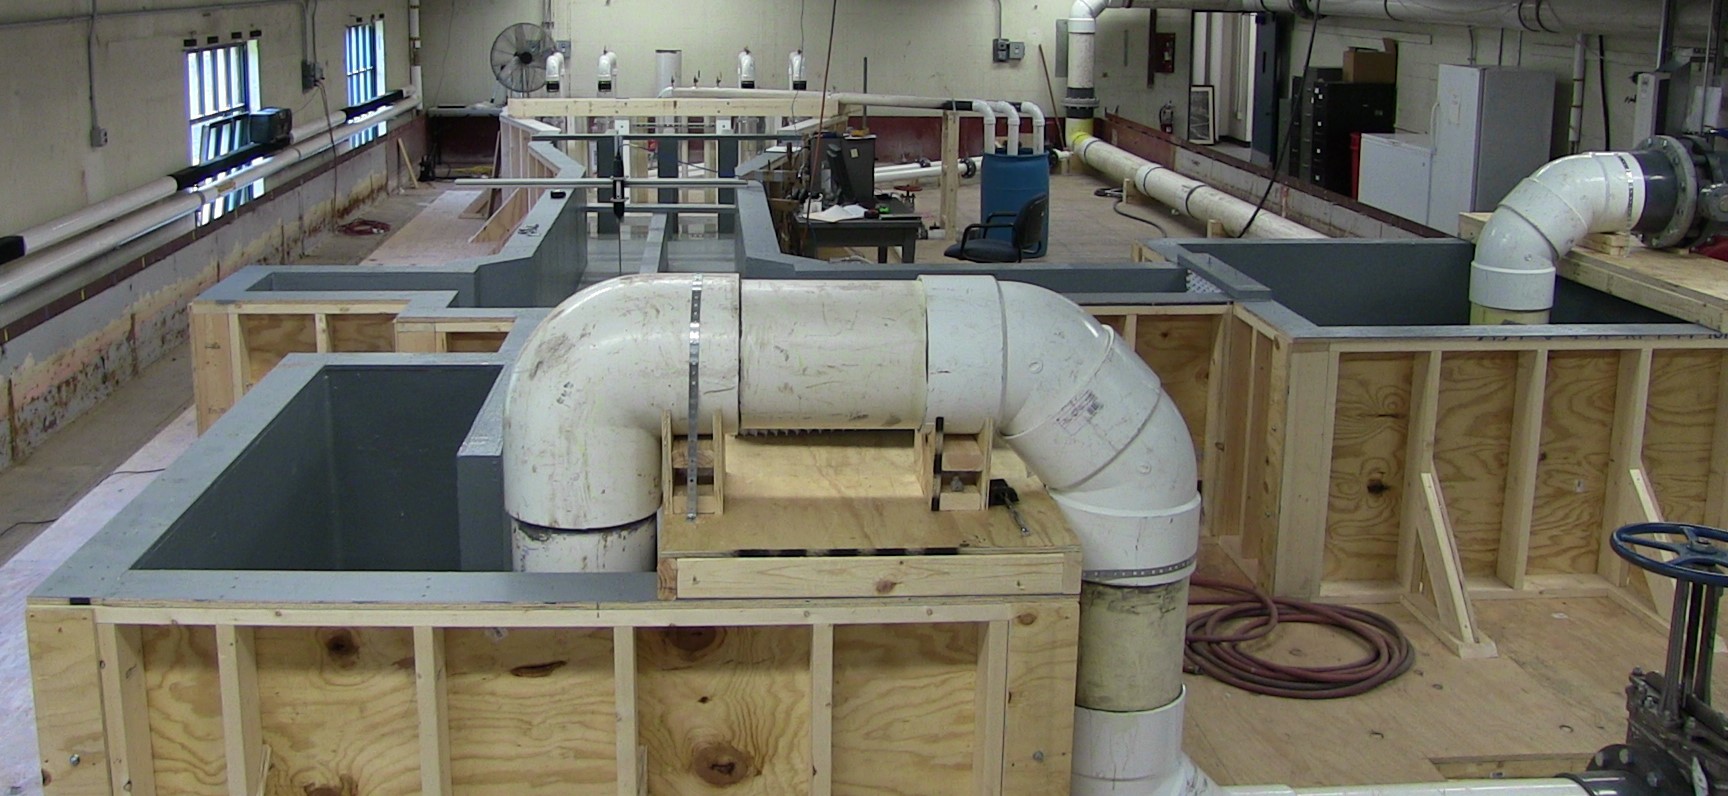 Photo of the Broadway Pump Station Model